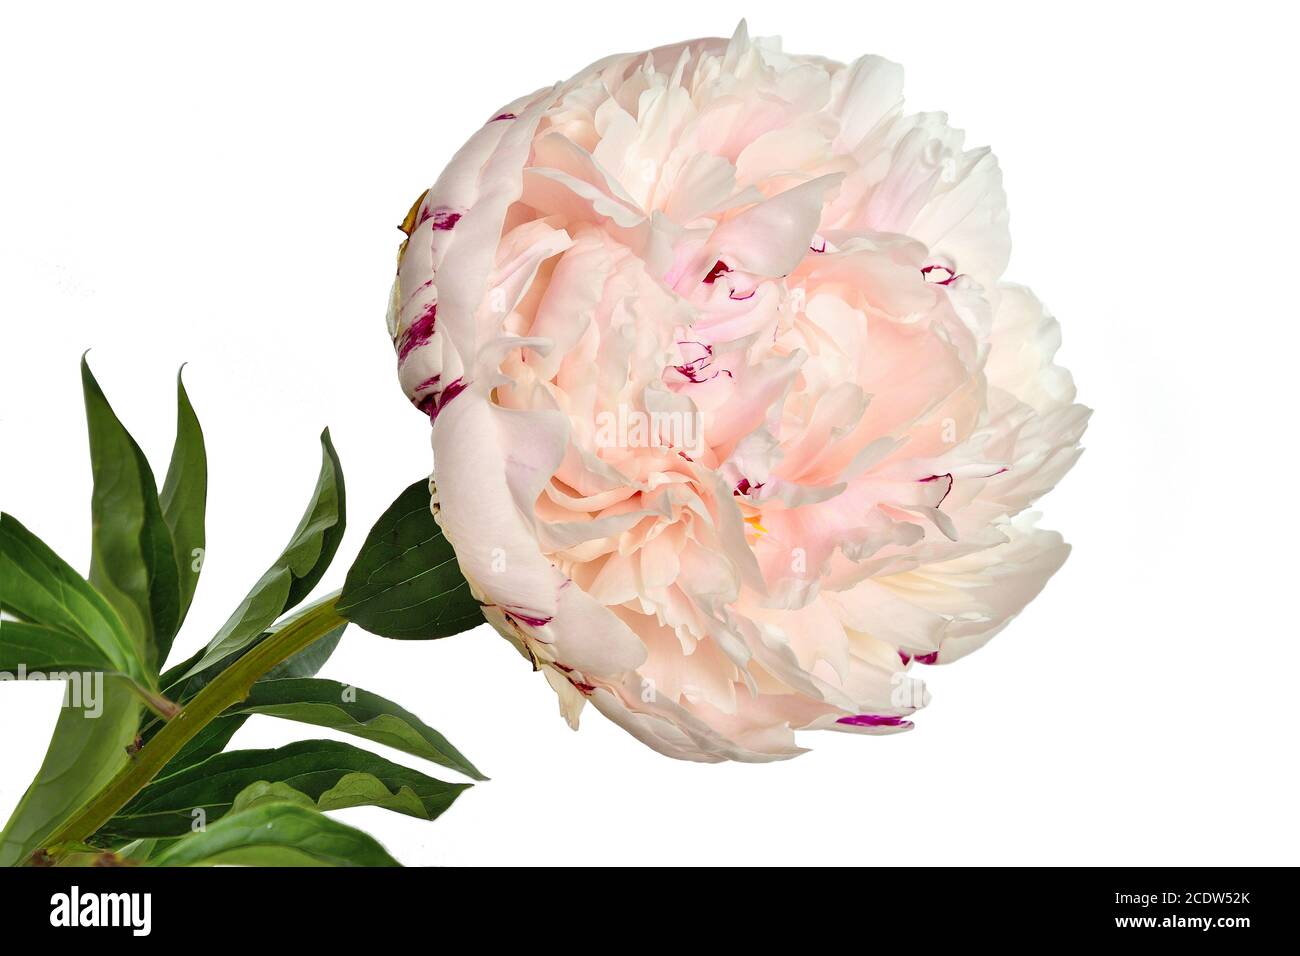 Beautiful gentle white-pink peony close up on a white background isolated Stock Photo